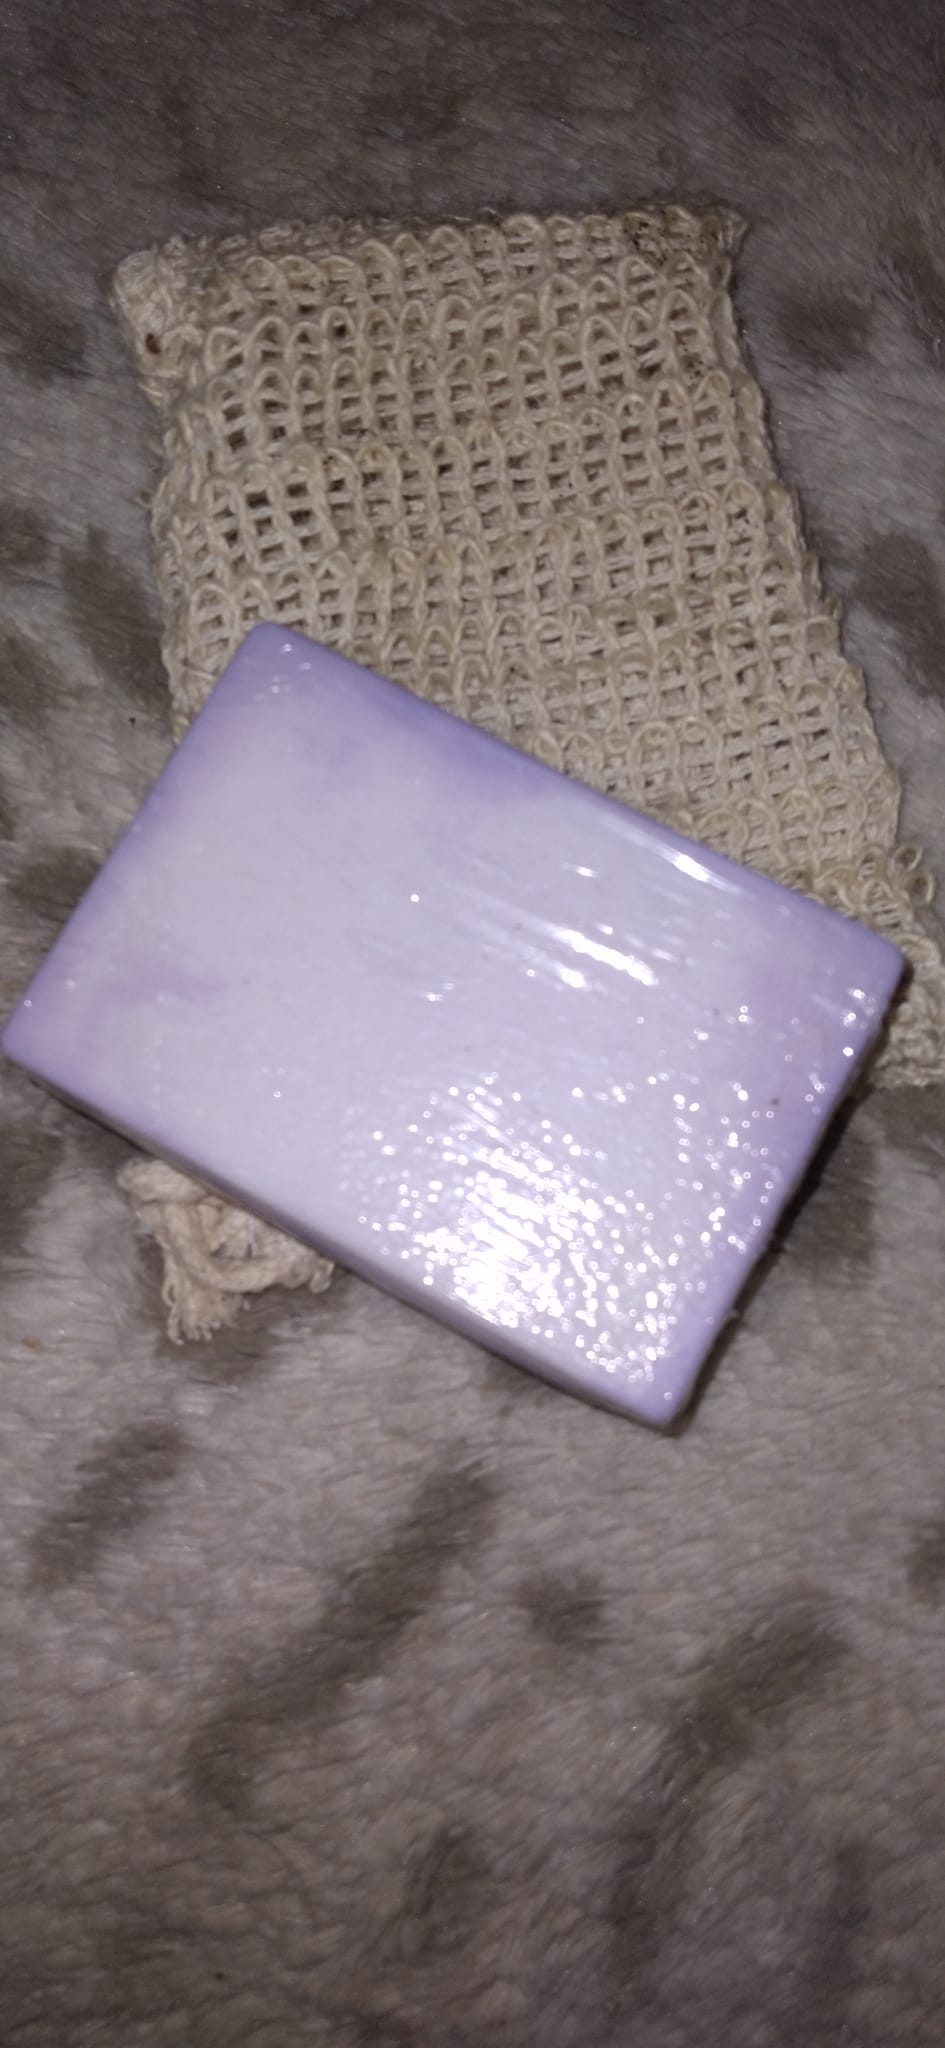 Shea Butter purple and white